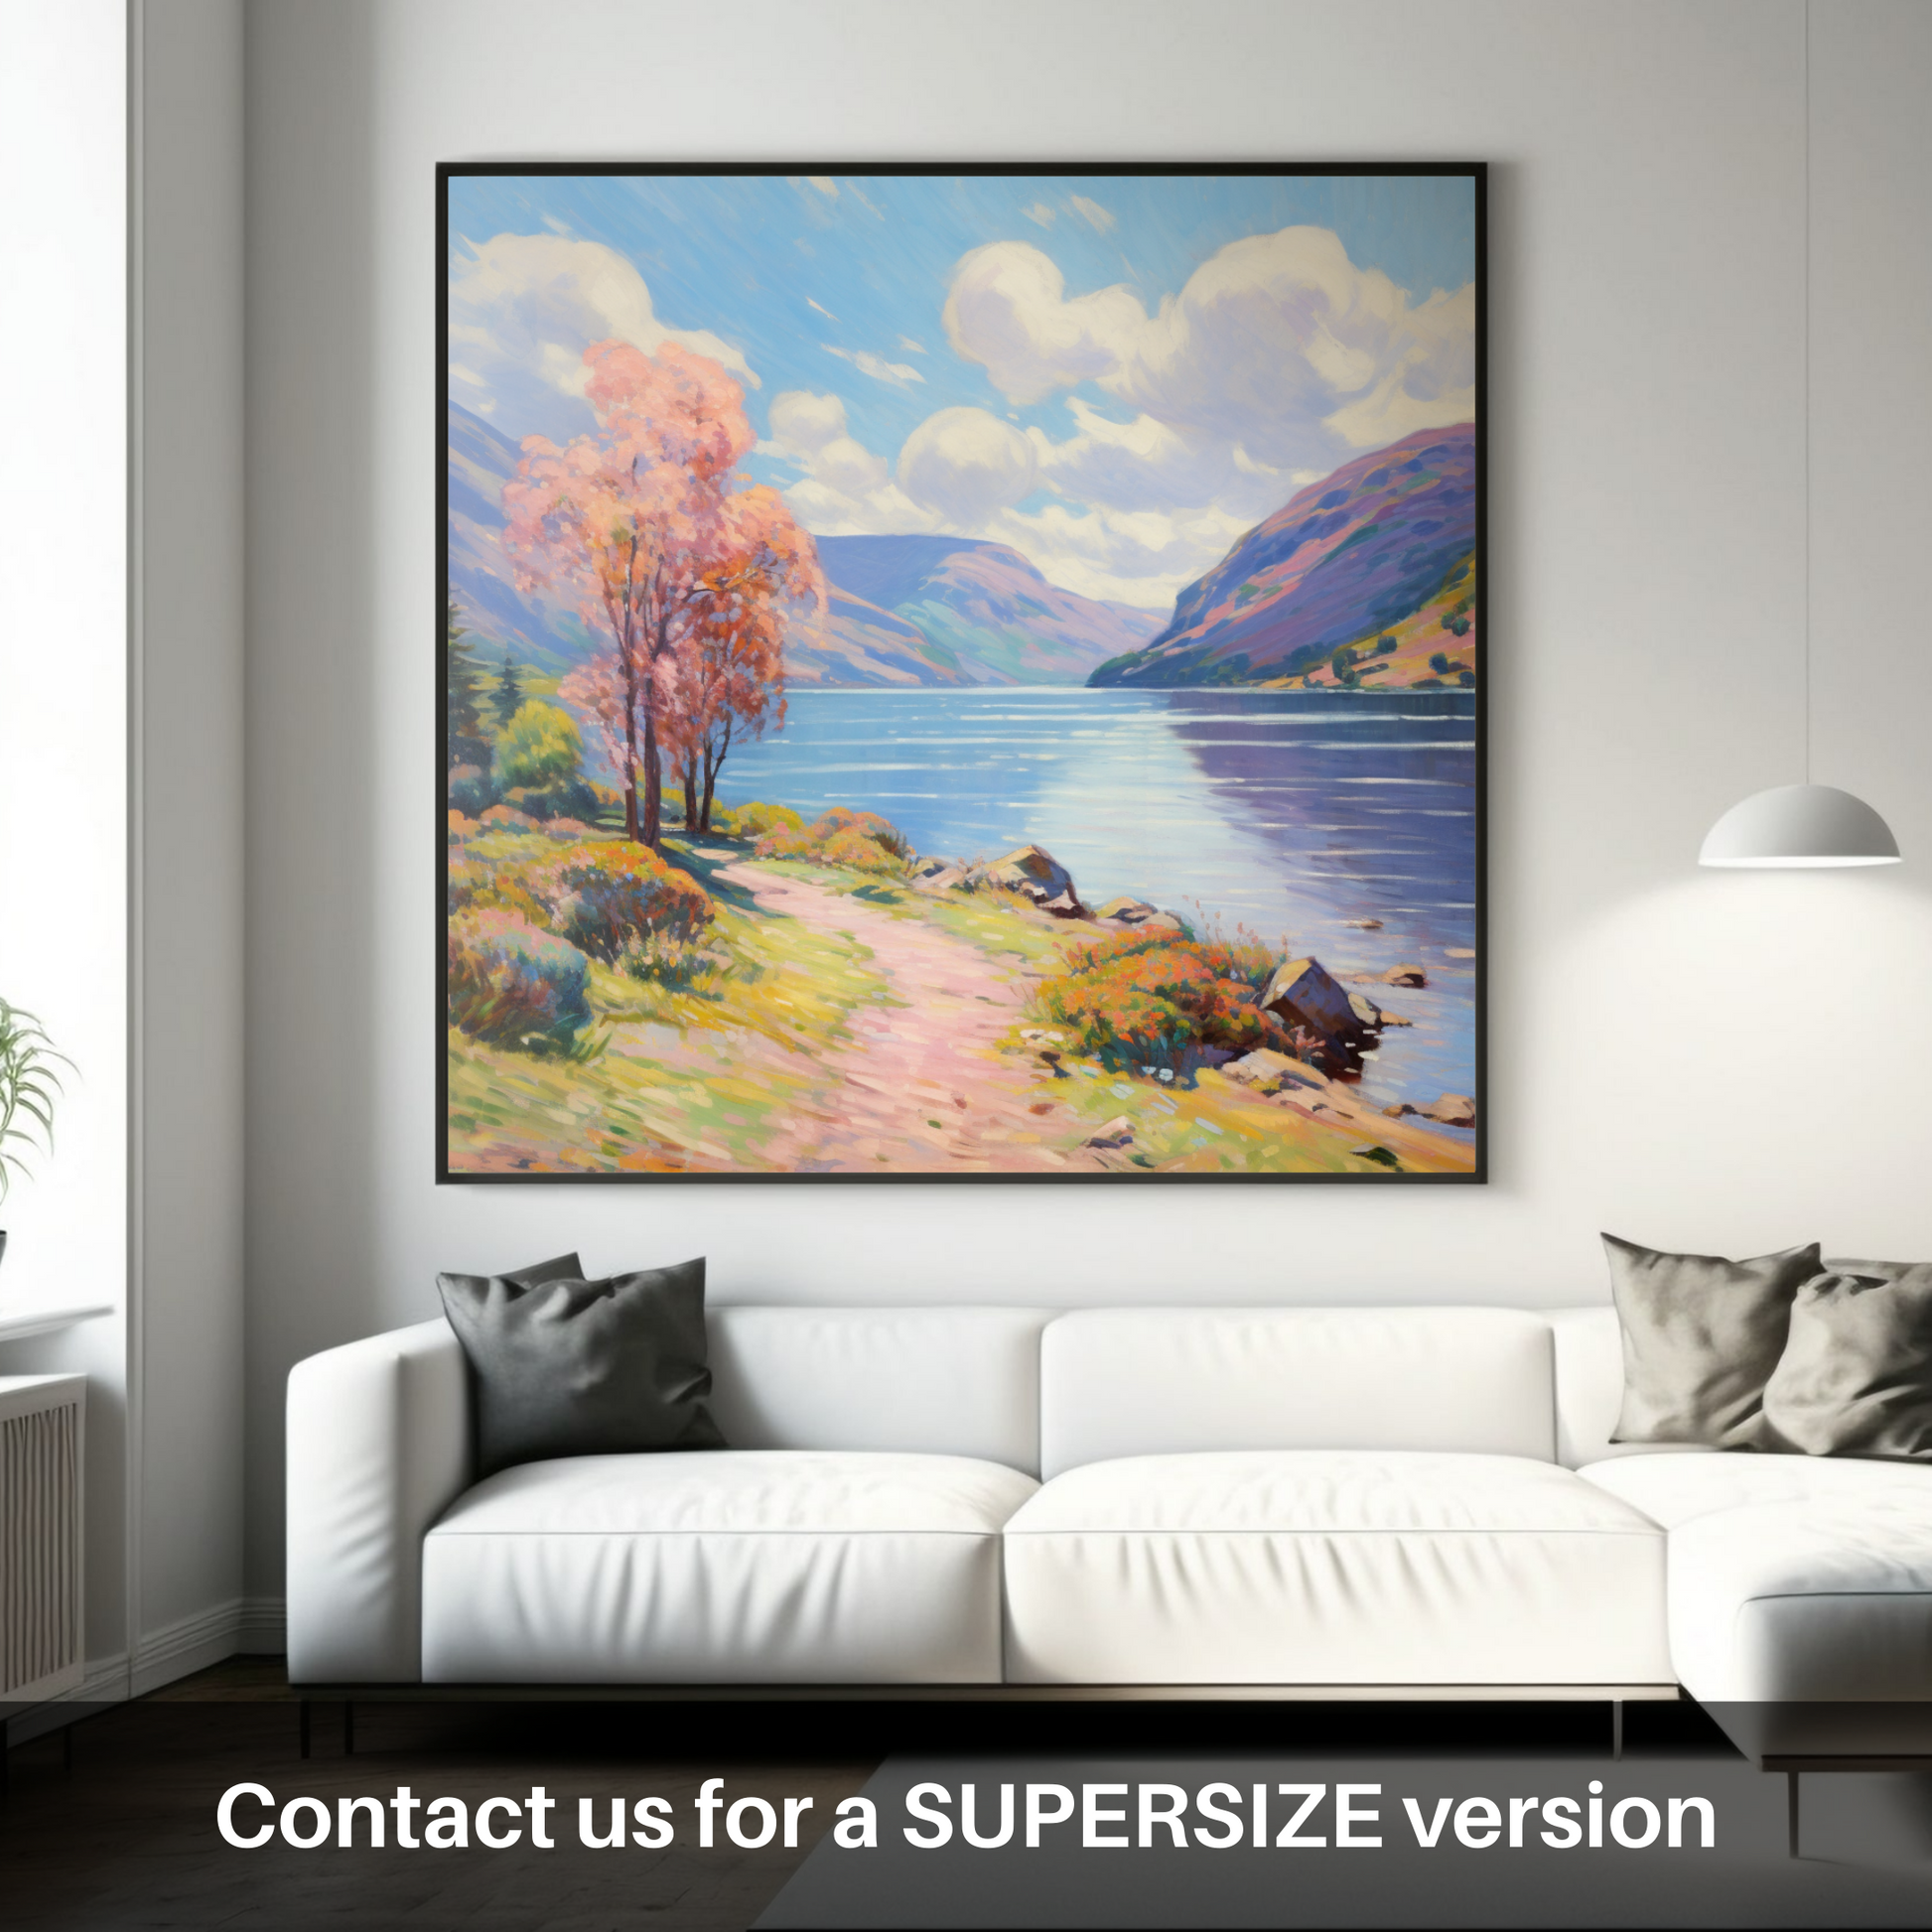 Huge supersize print of Loch Earn, Perth and Kinross in summer